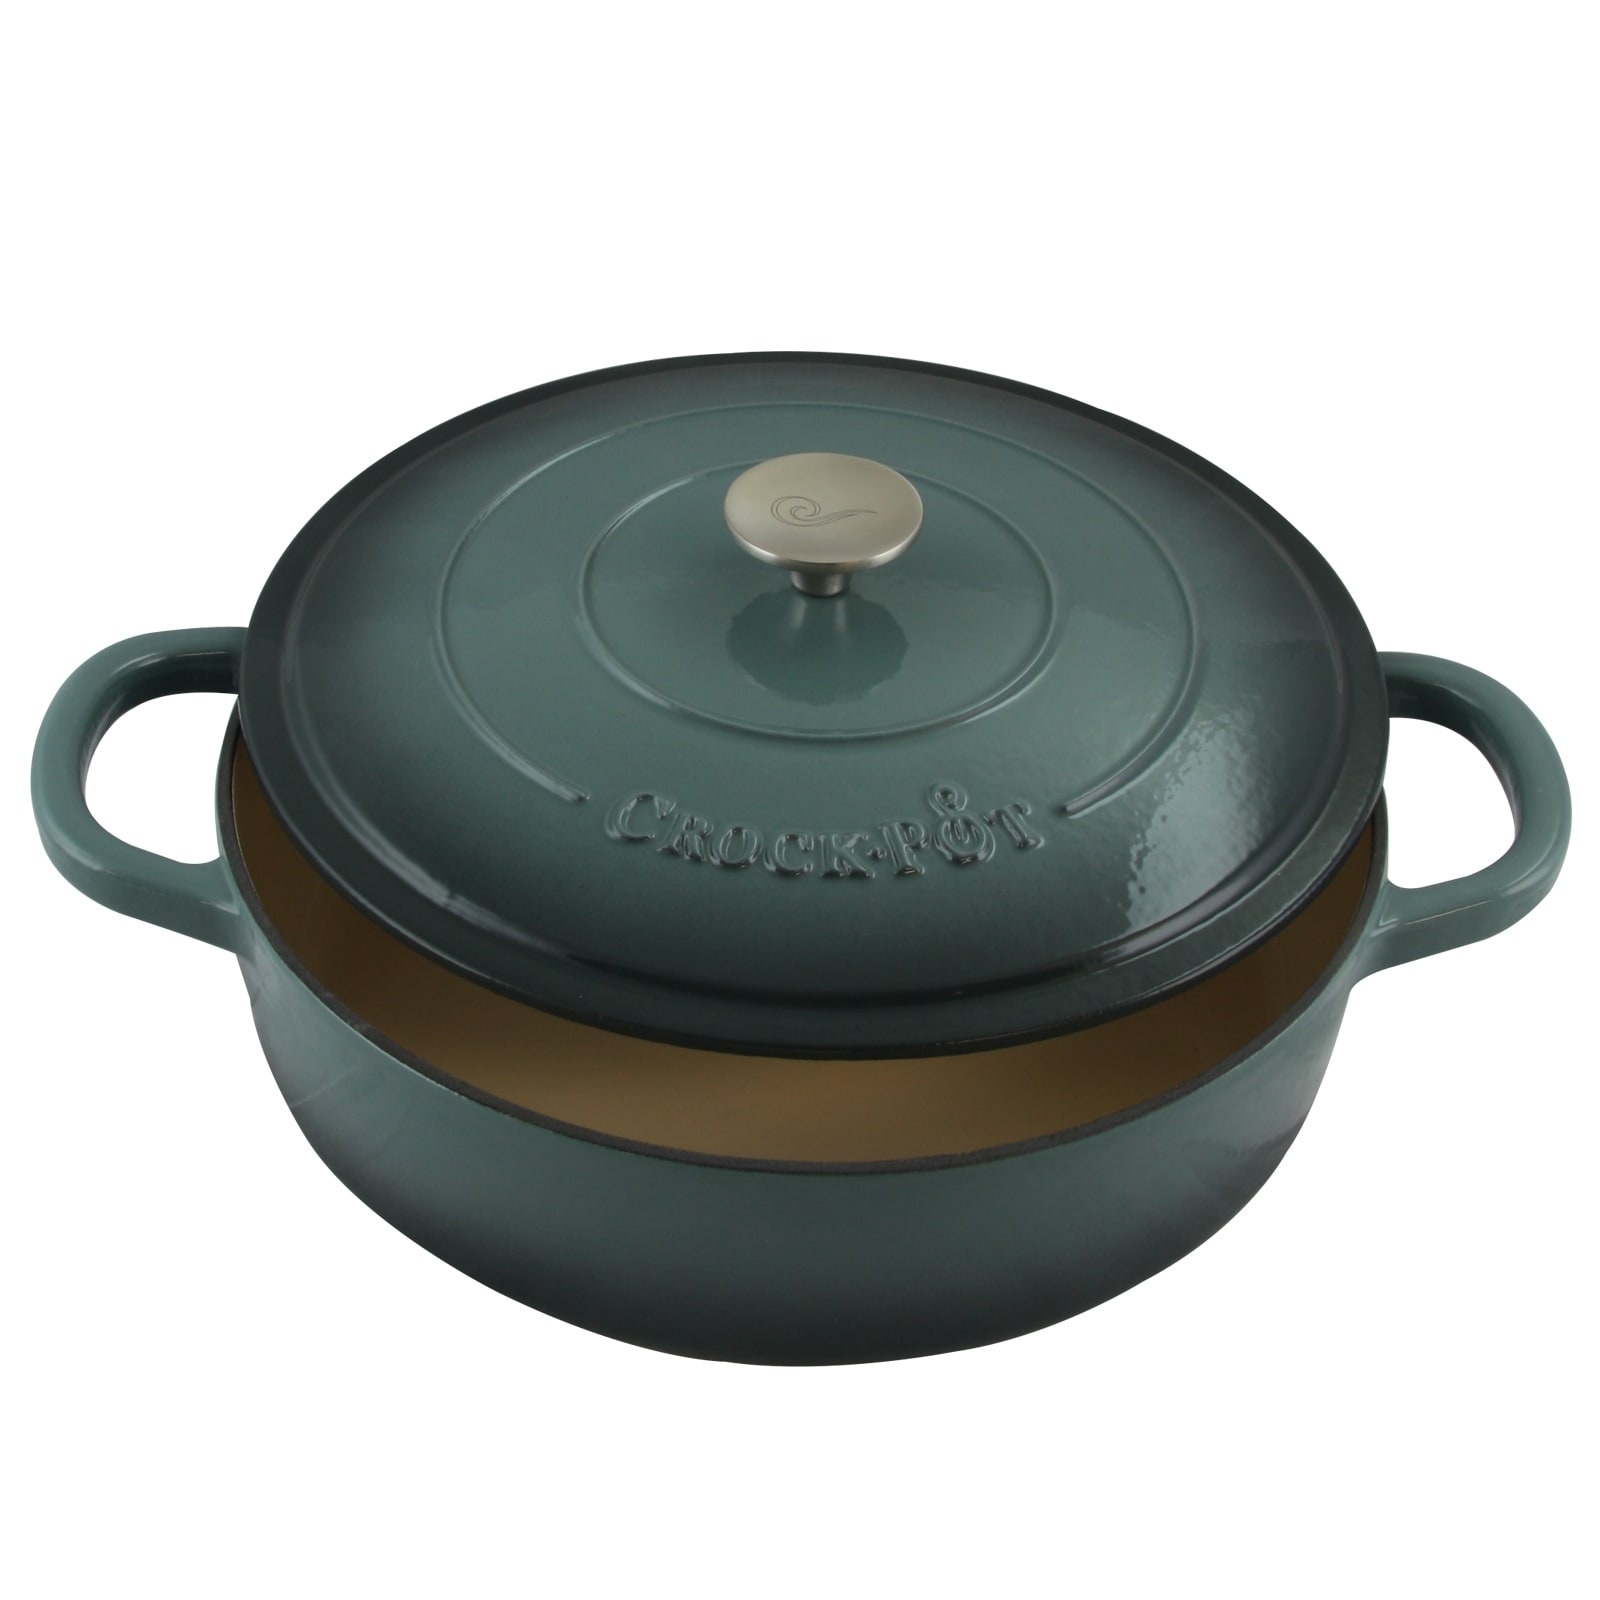 https://ak1.ostkcdn.com/images/products/is/images/direct/da82b16f6bb0e39b0500d14a77f5c8ac967ded0f/Enameled-5-Quart-Cast-Iron-Round-Braising-Pan-W--Lid-in-Ash.jpg